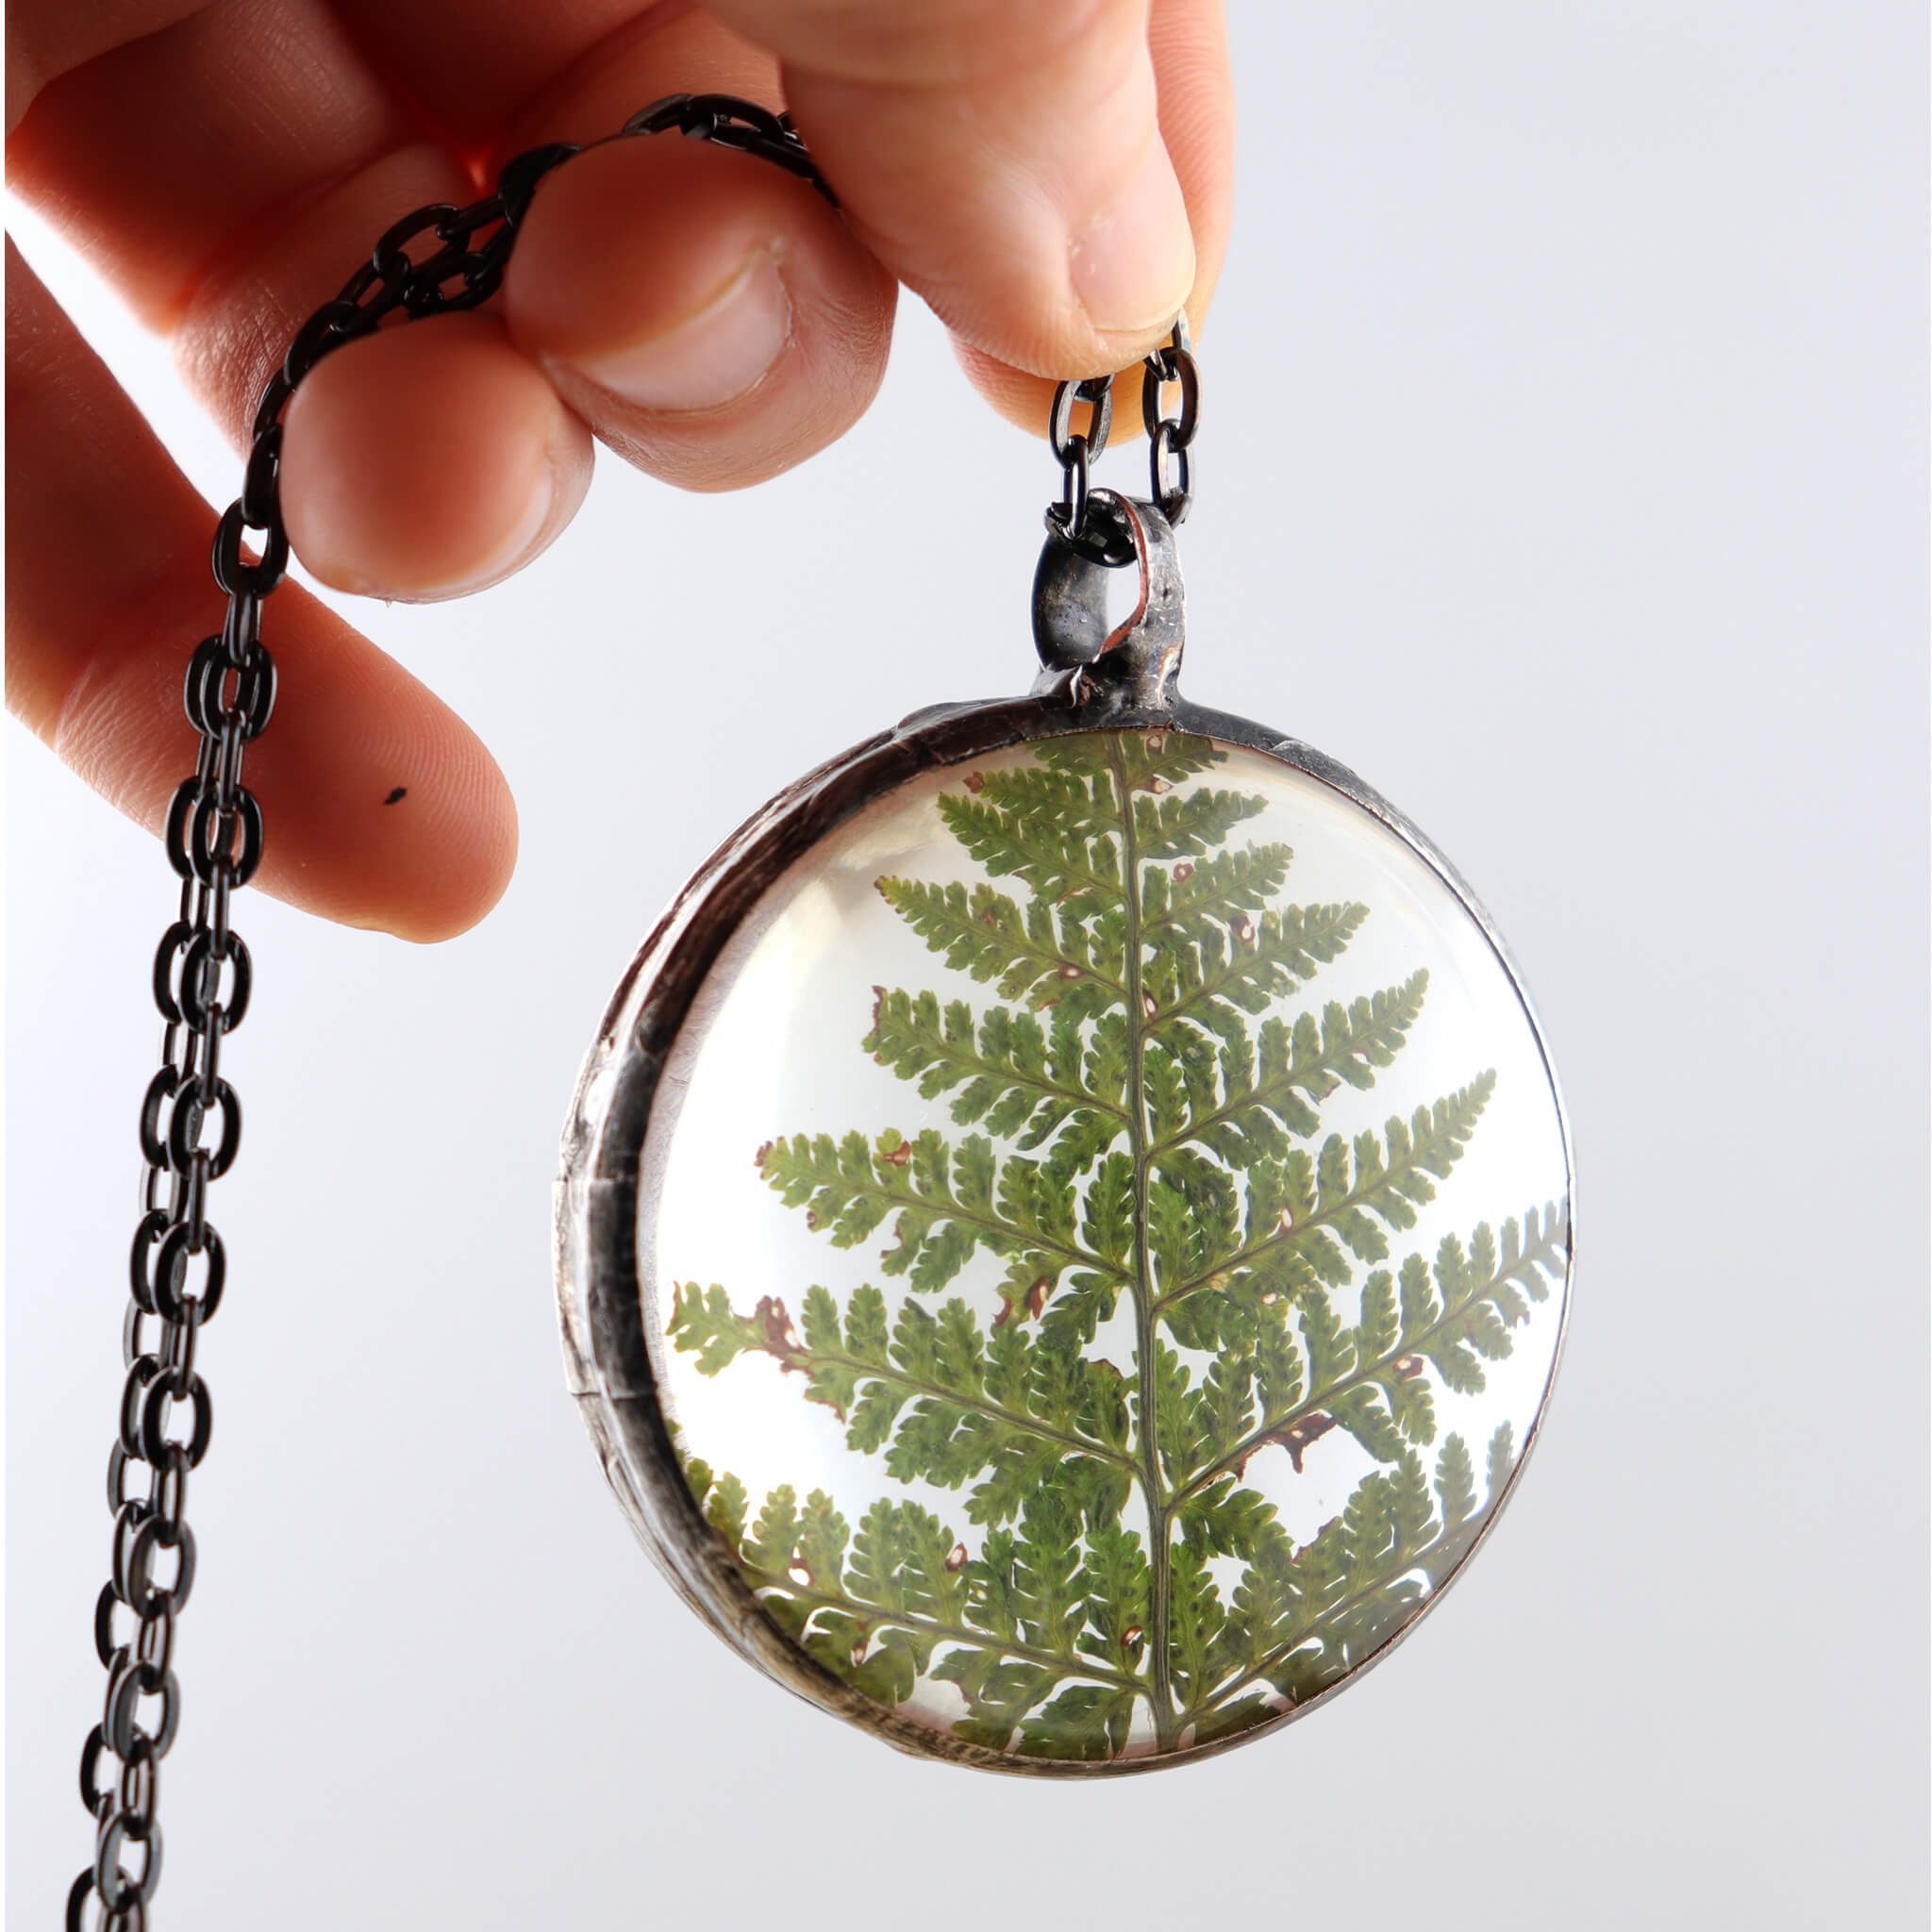 Fern necklace hold in hand to see through the glass